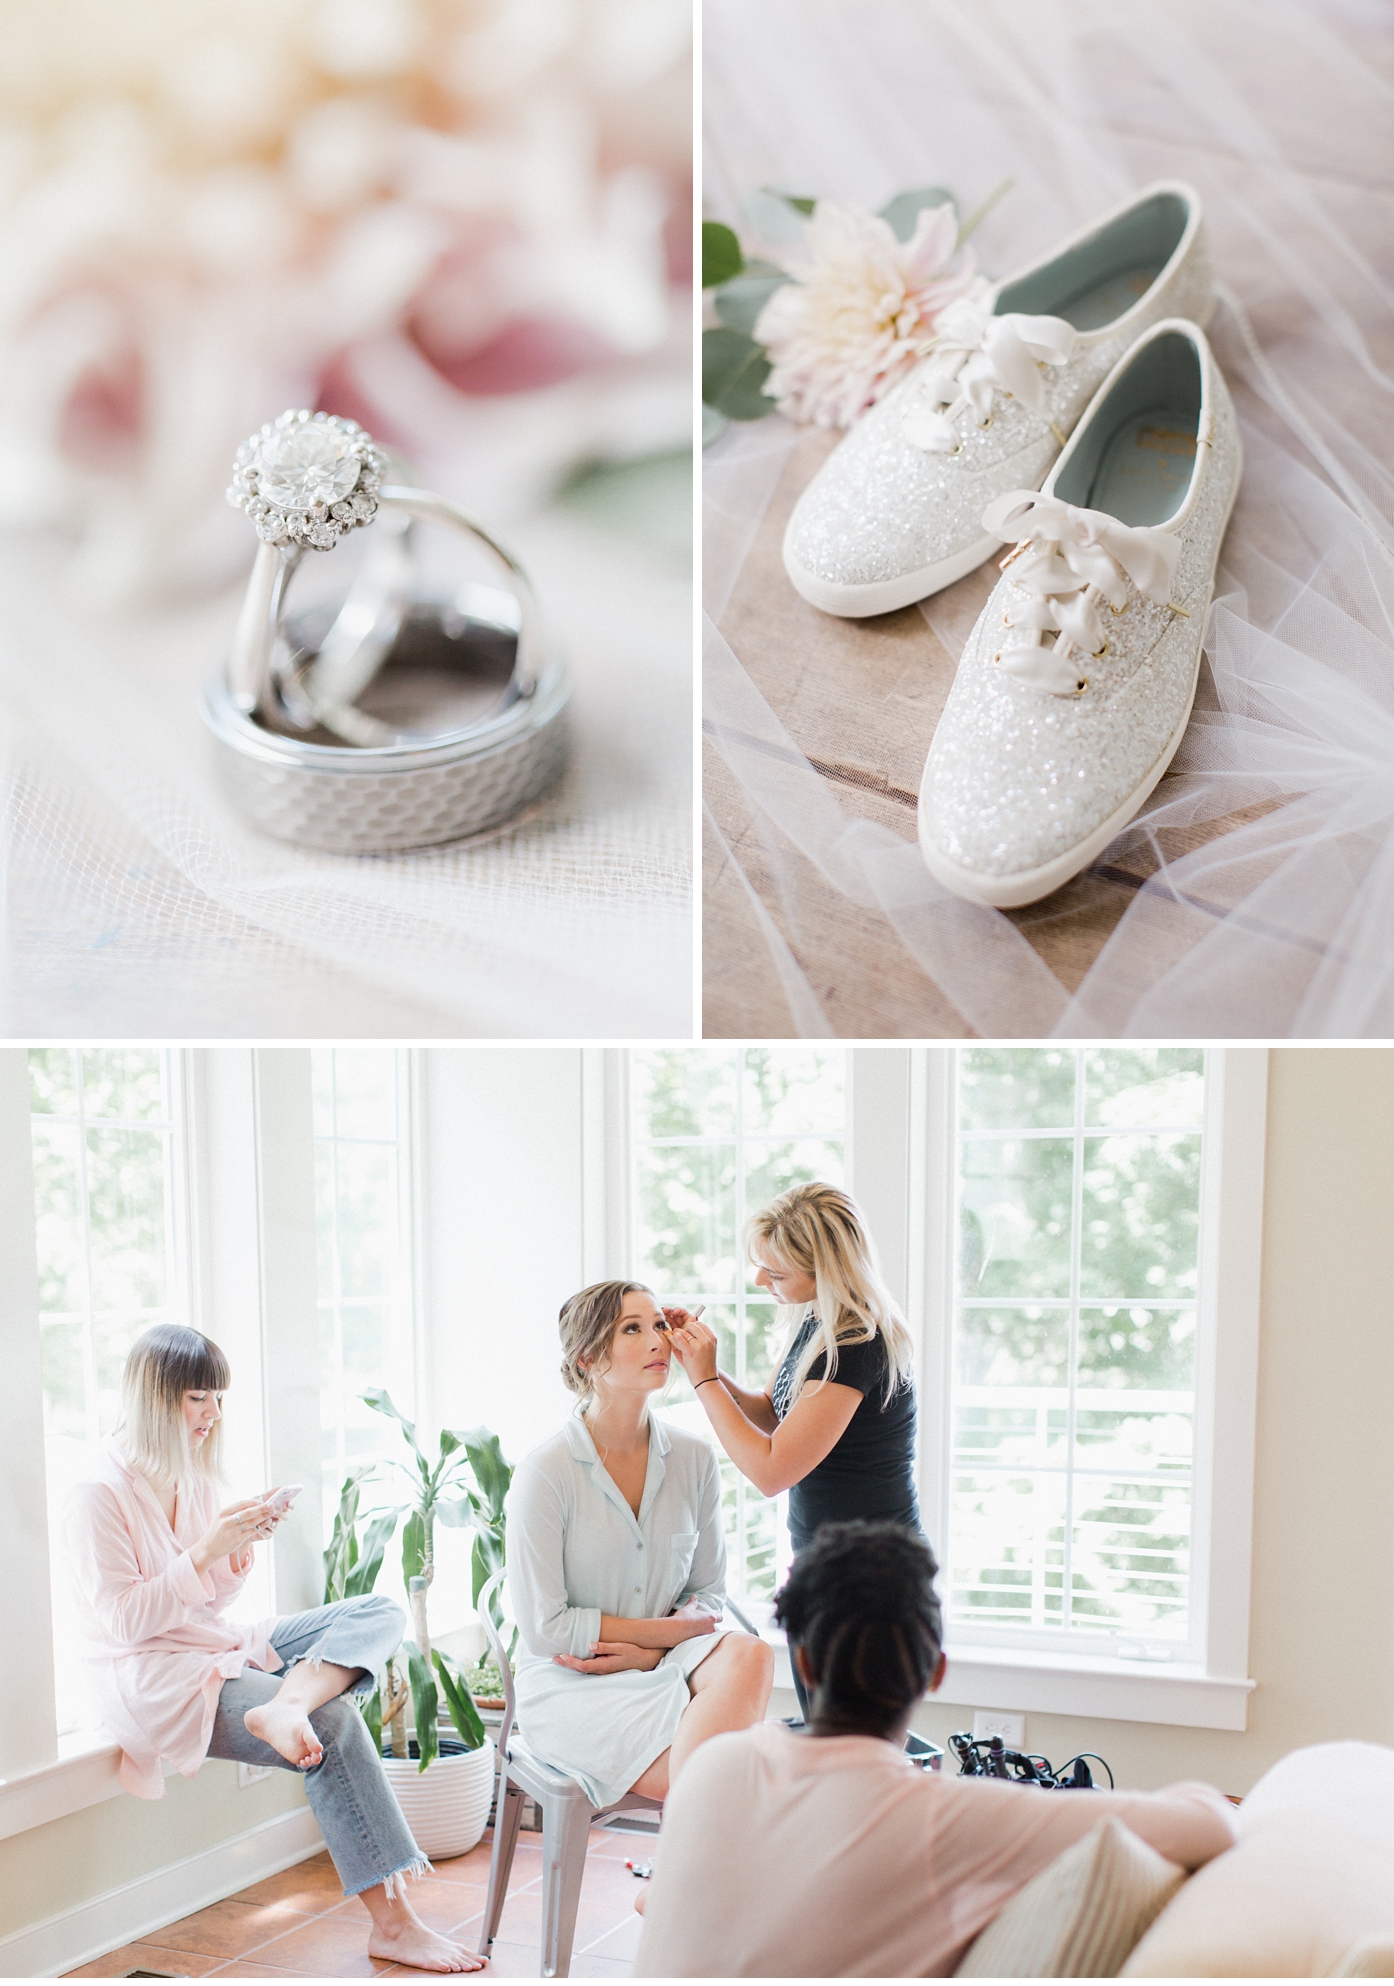 Kate Spade Shoes at Big Spring Farm by Alisandra Photography